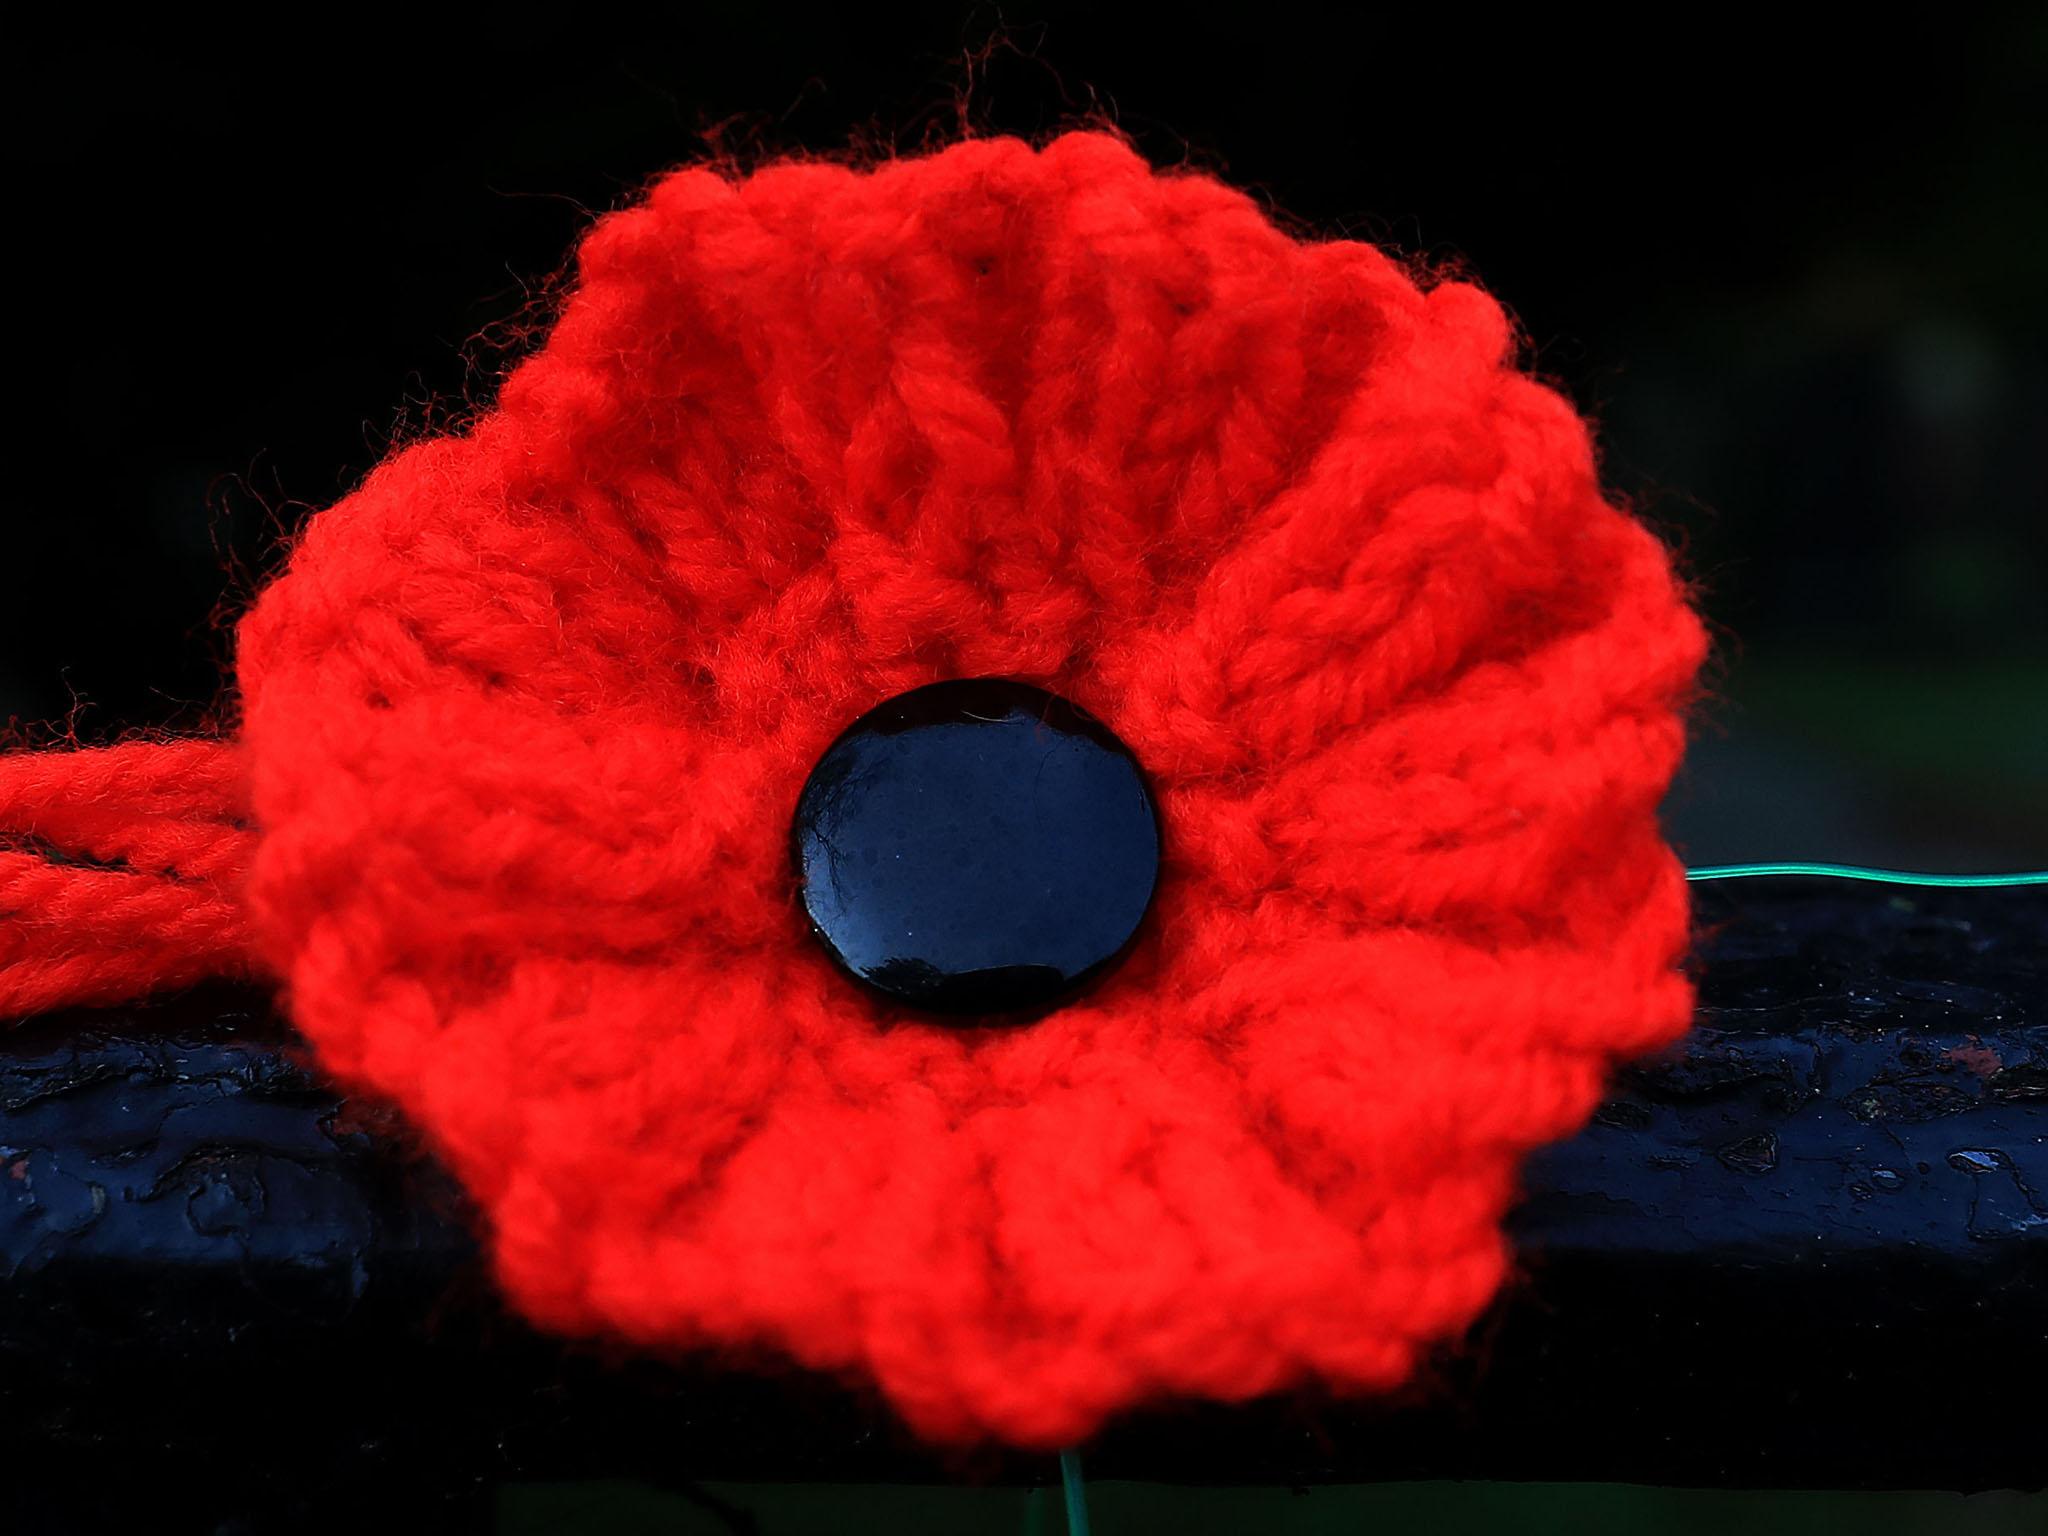 The Poppy Appeal is not about politics, but about people